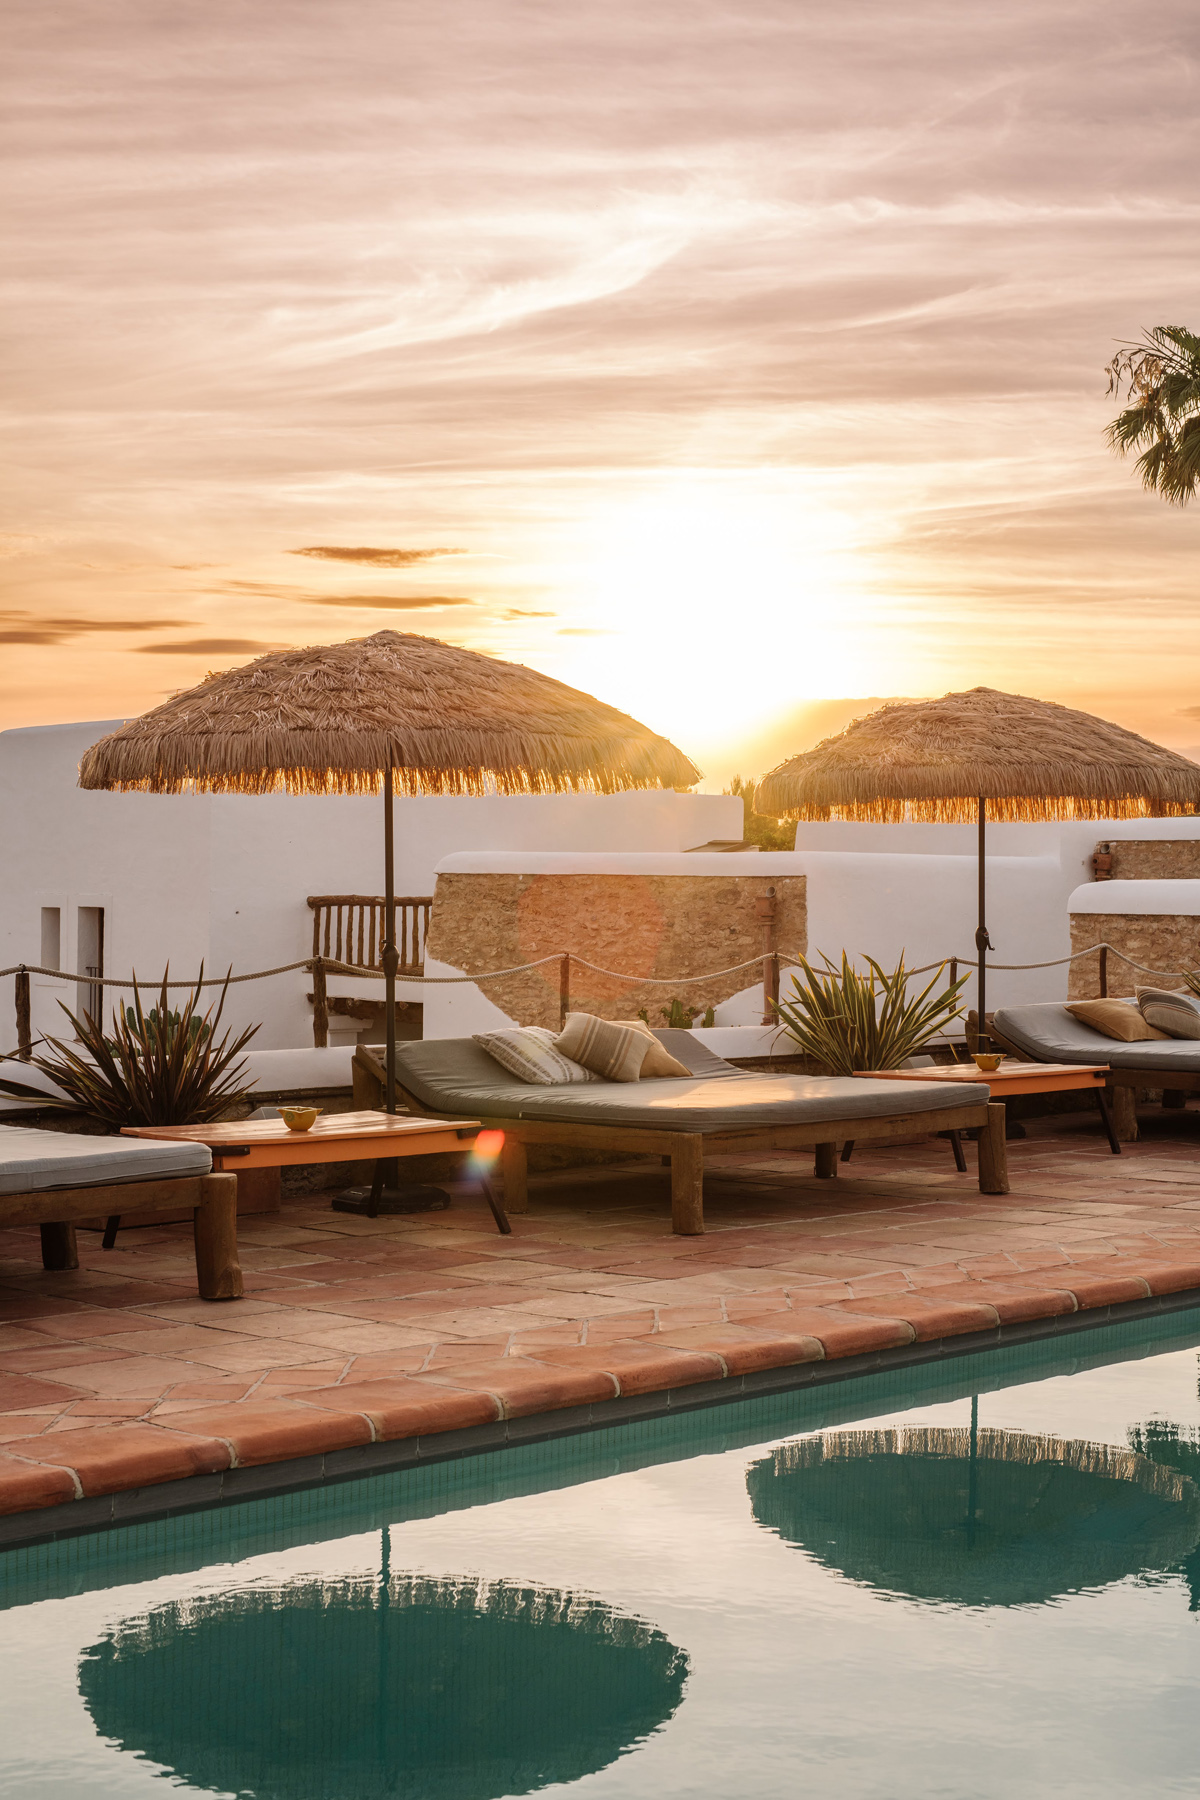 Sunset behind the pool of a rustic rental villa in Ibiza